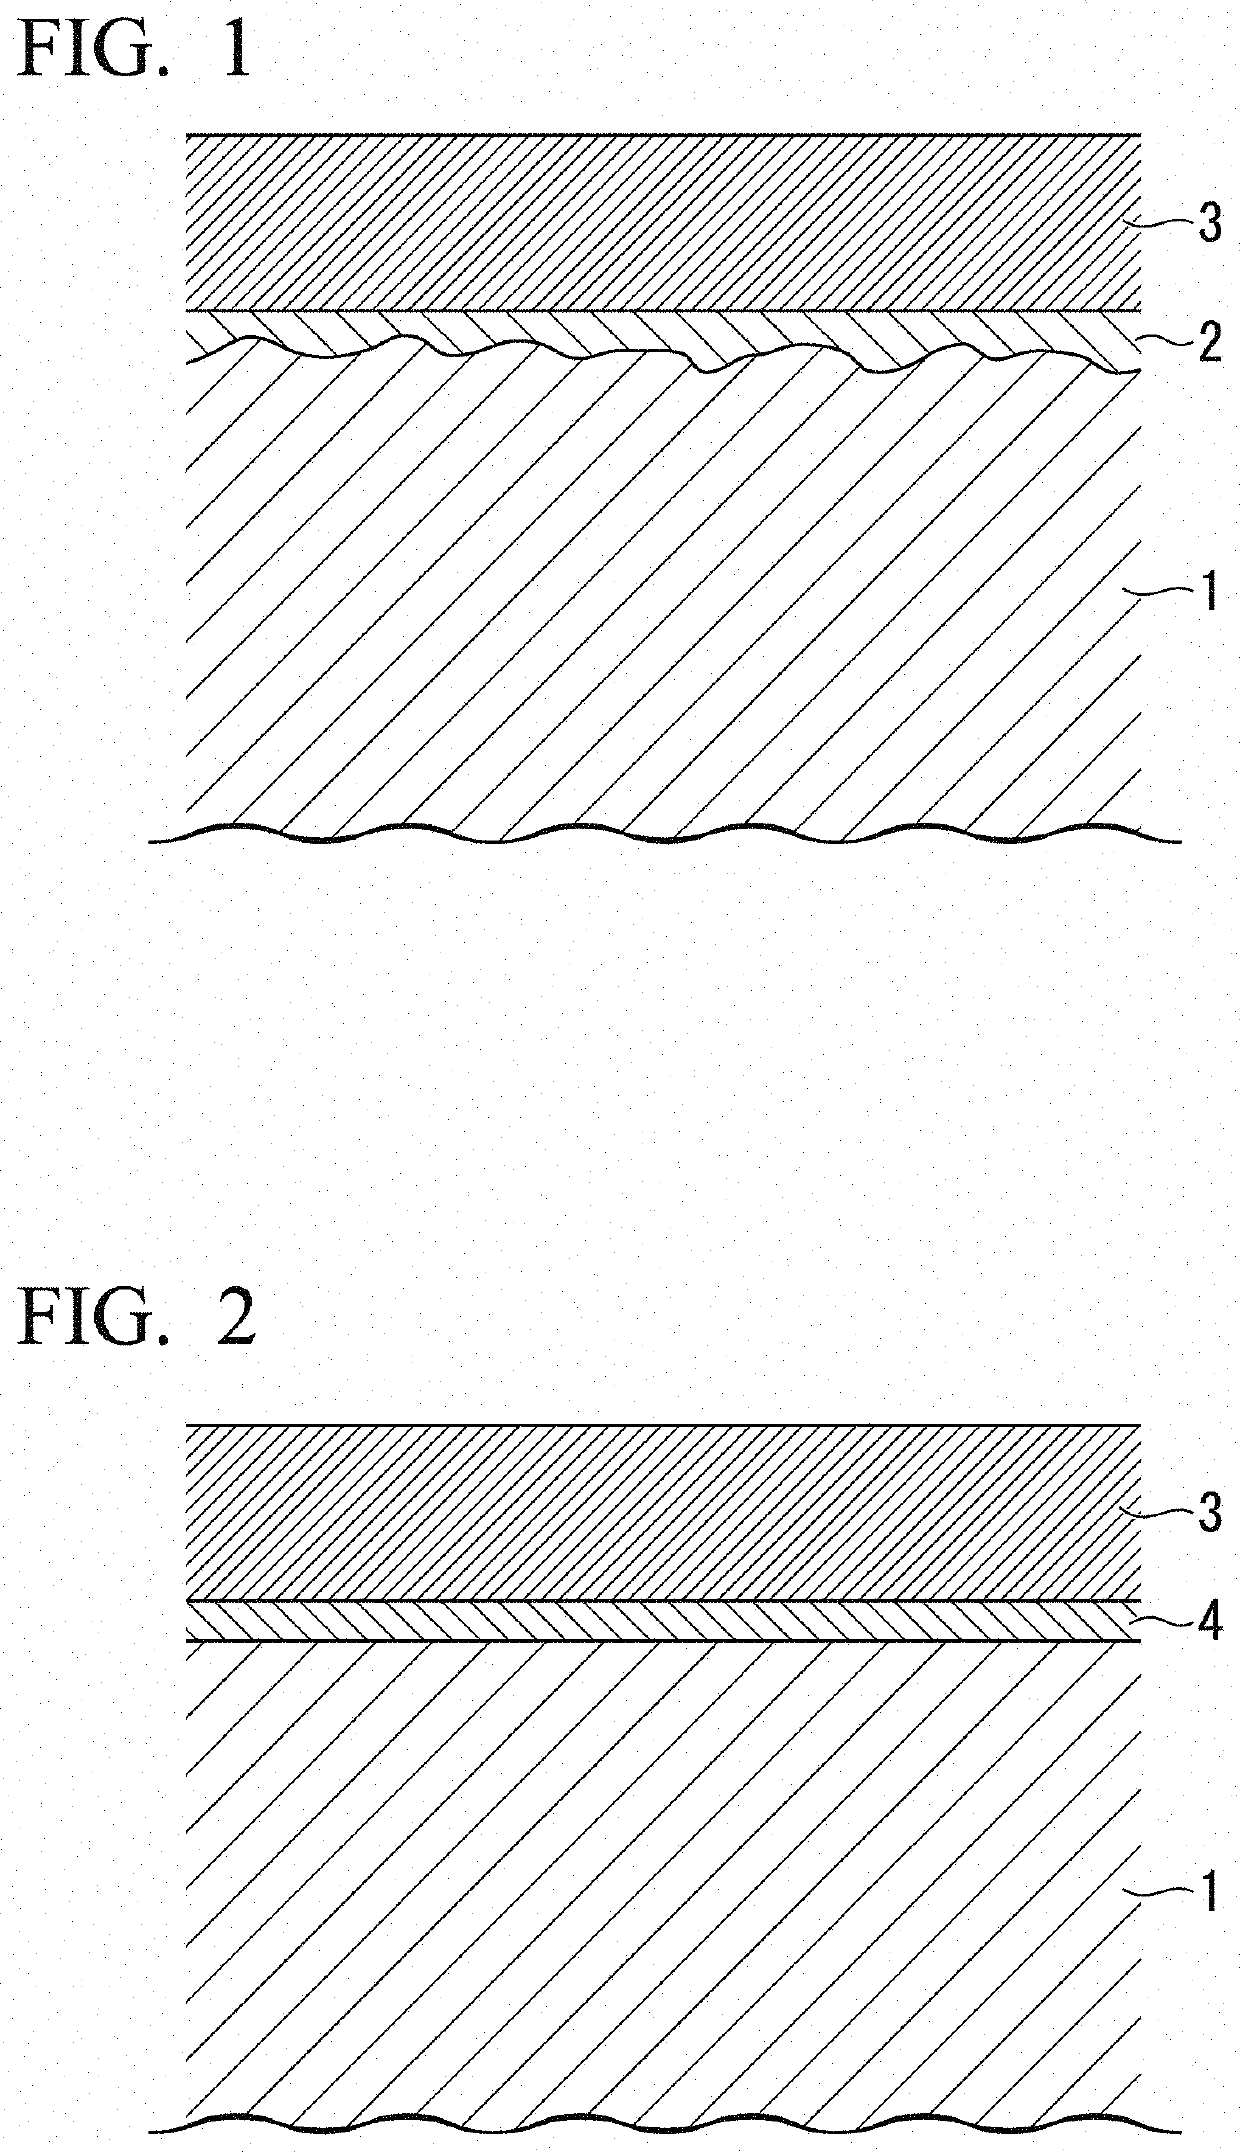 Grain-oriented electrical steel sheet and method for manufacturing the same